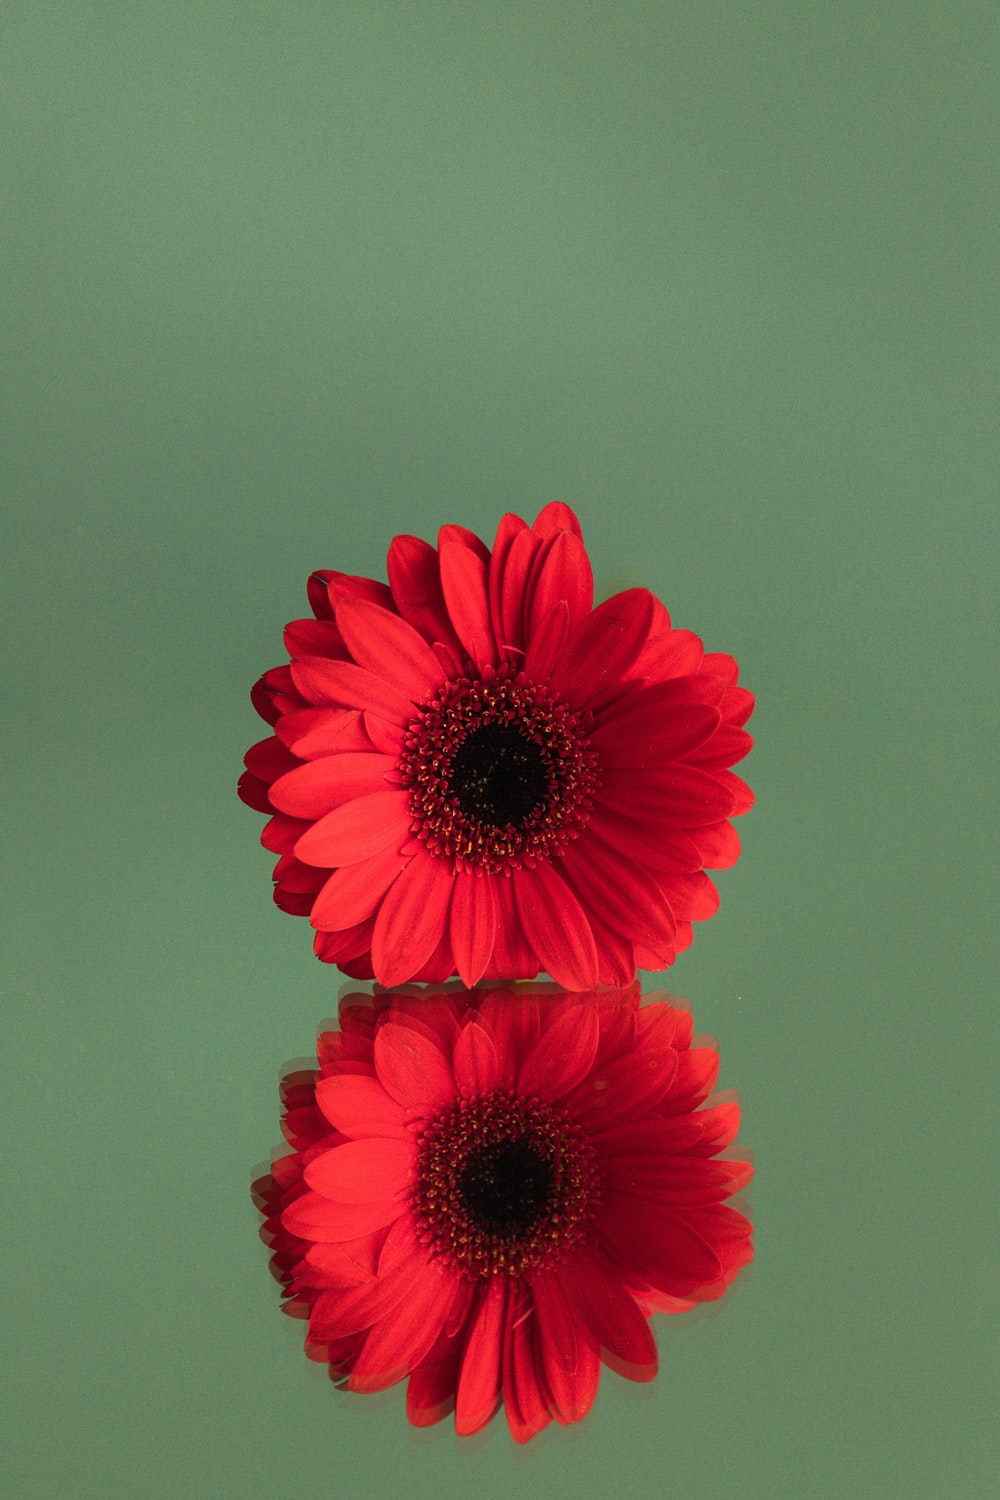 red gerbera daisy in bloom photo Free Red Image on